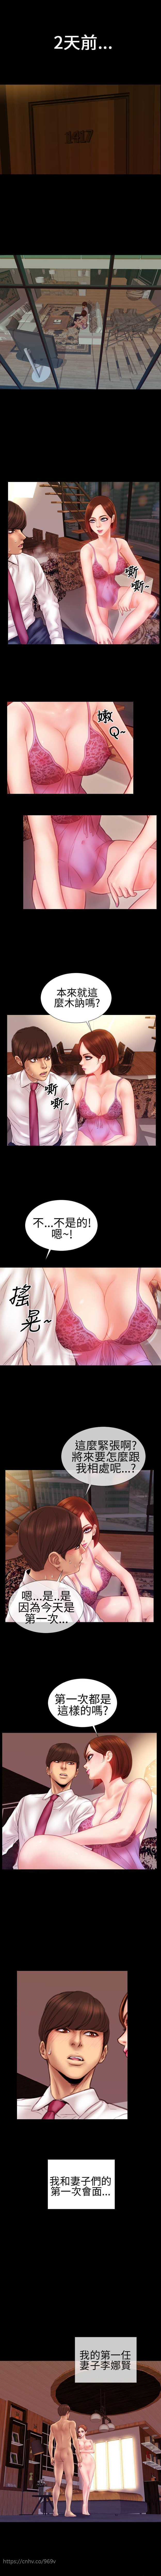 MY WIVES (淫蕩的妻子們) Ch.4-6 [Chinese] 2